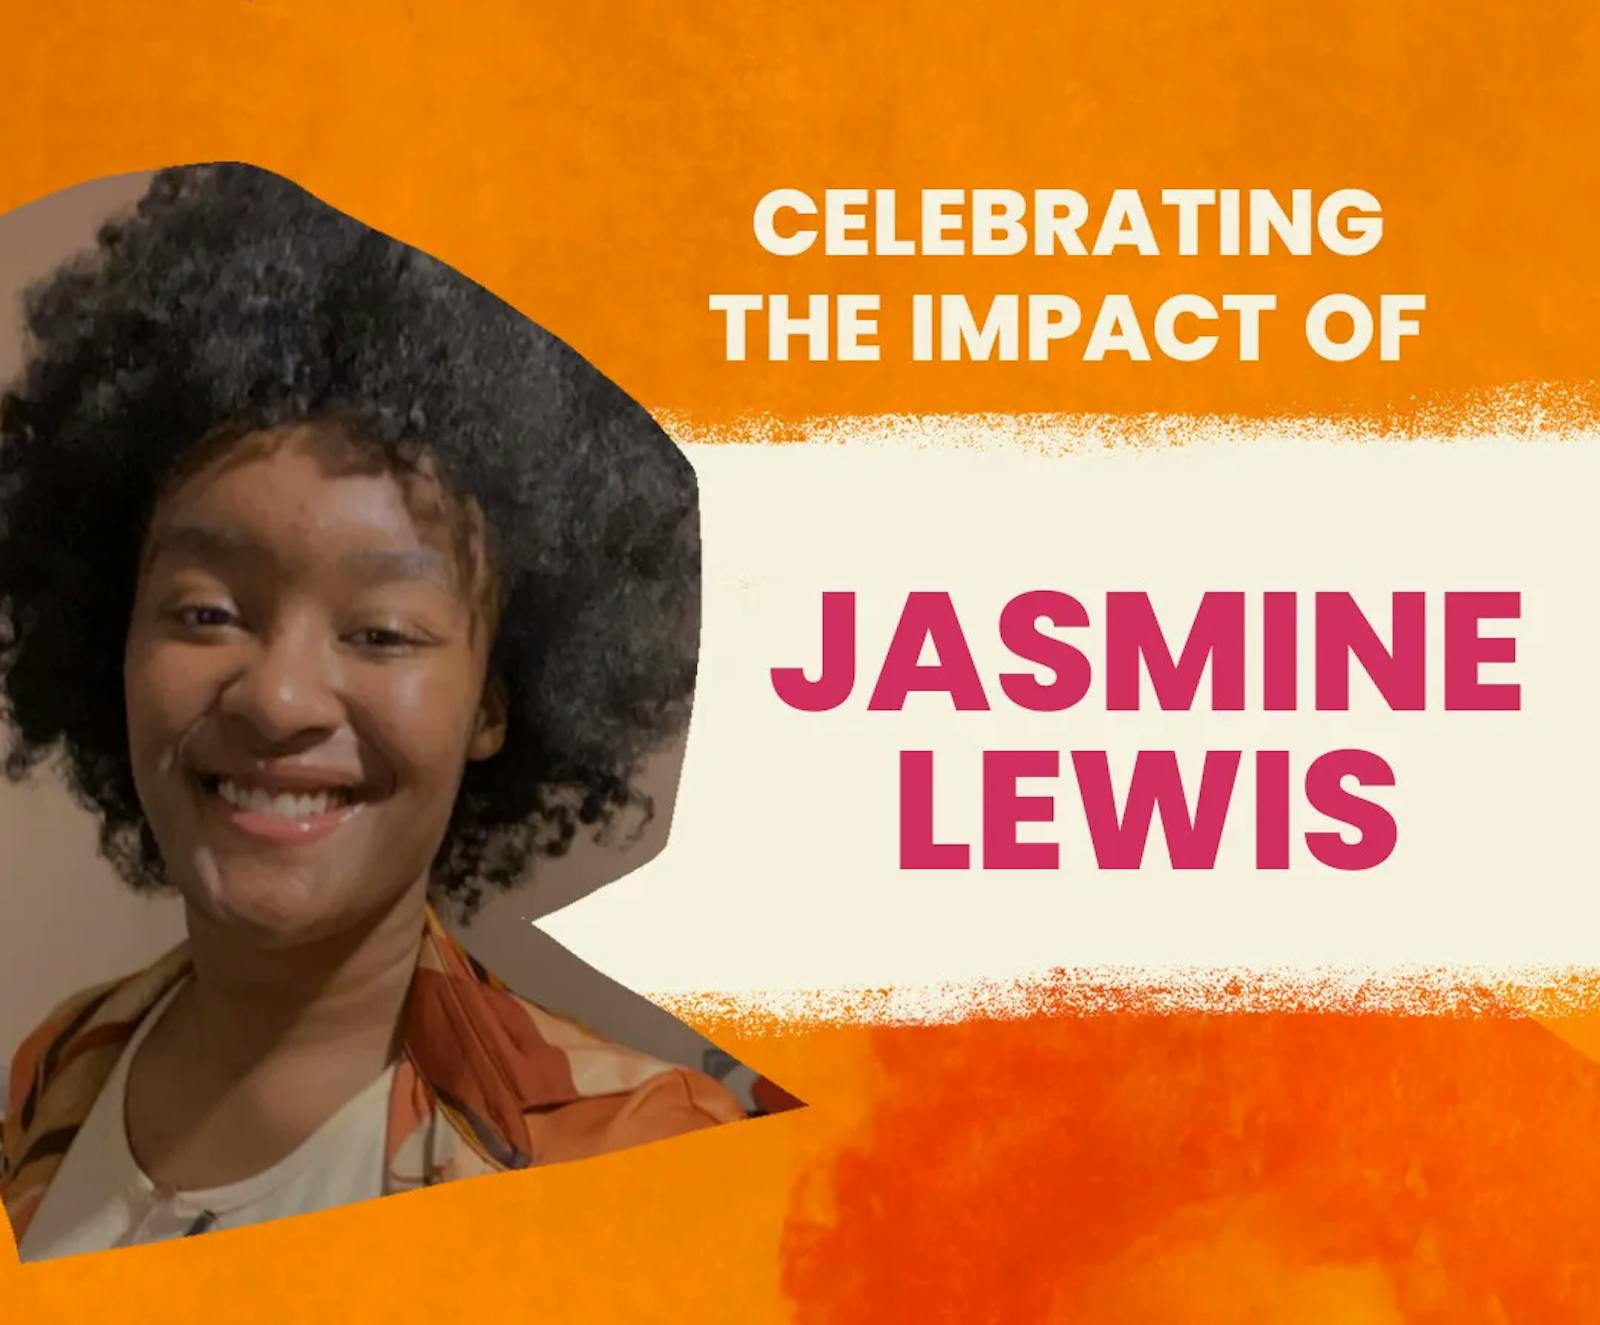 CRXLAB: "Know what I’m ‘TALMBAT’: The Importance of Storytelling in the World with Jasmine Lewis"